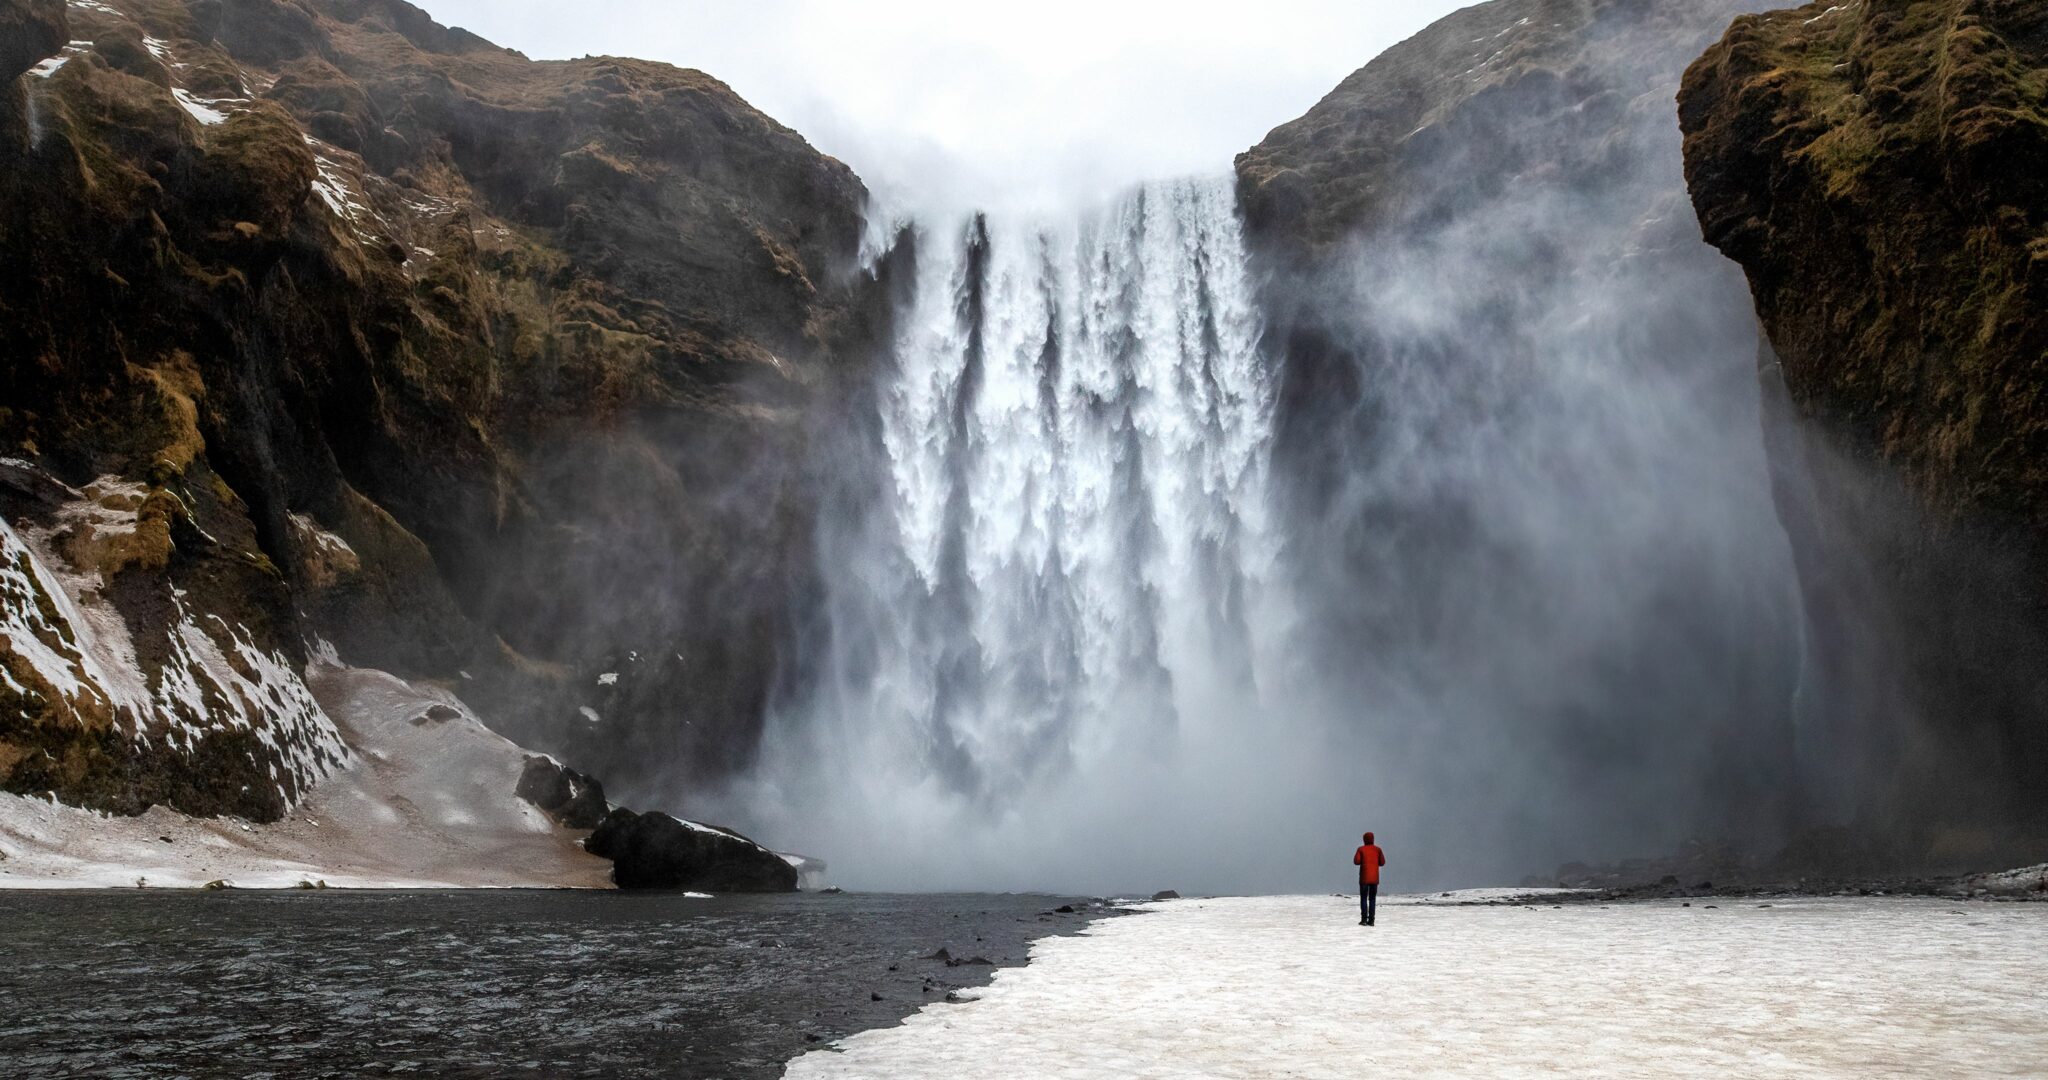 Skogafoss waterfall with solitary person